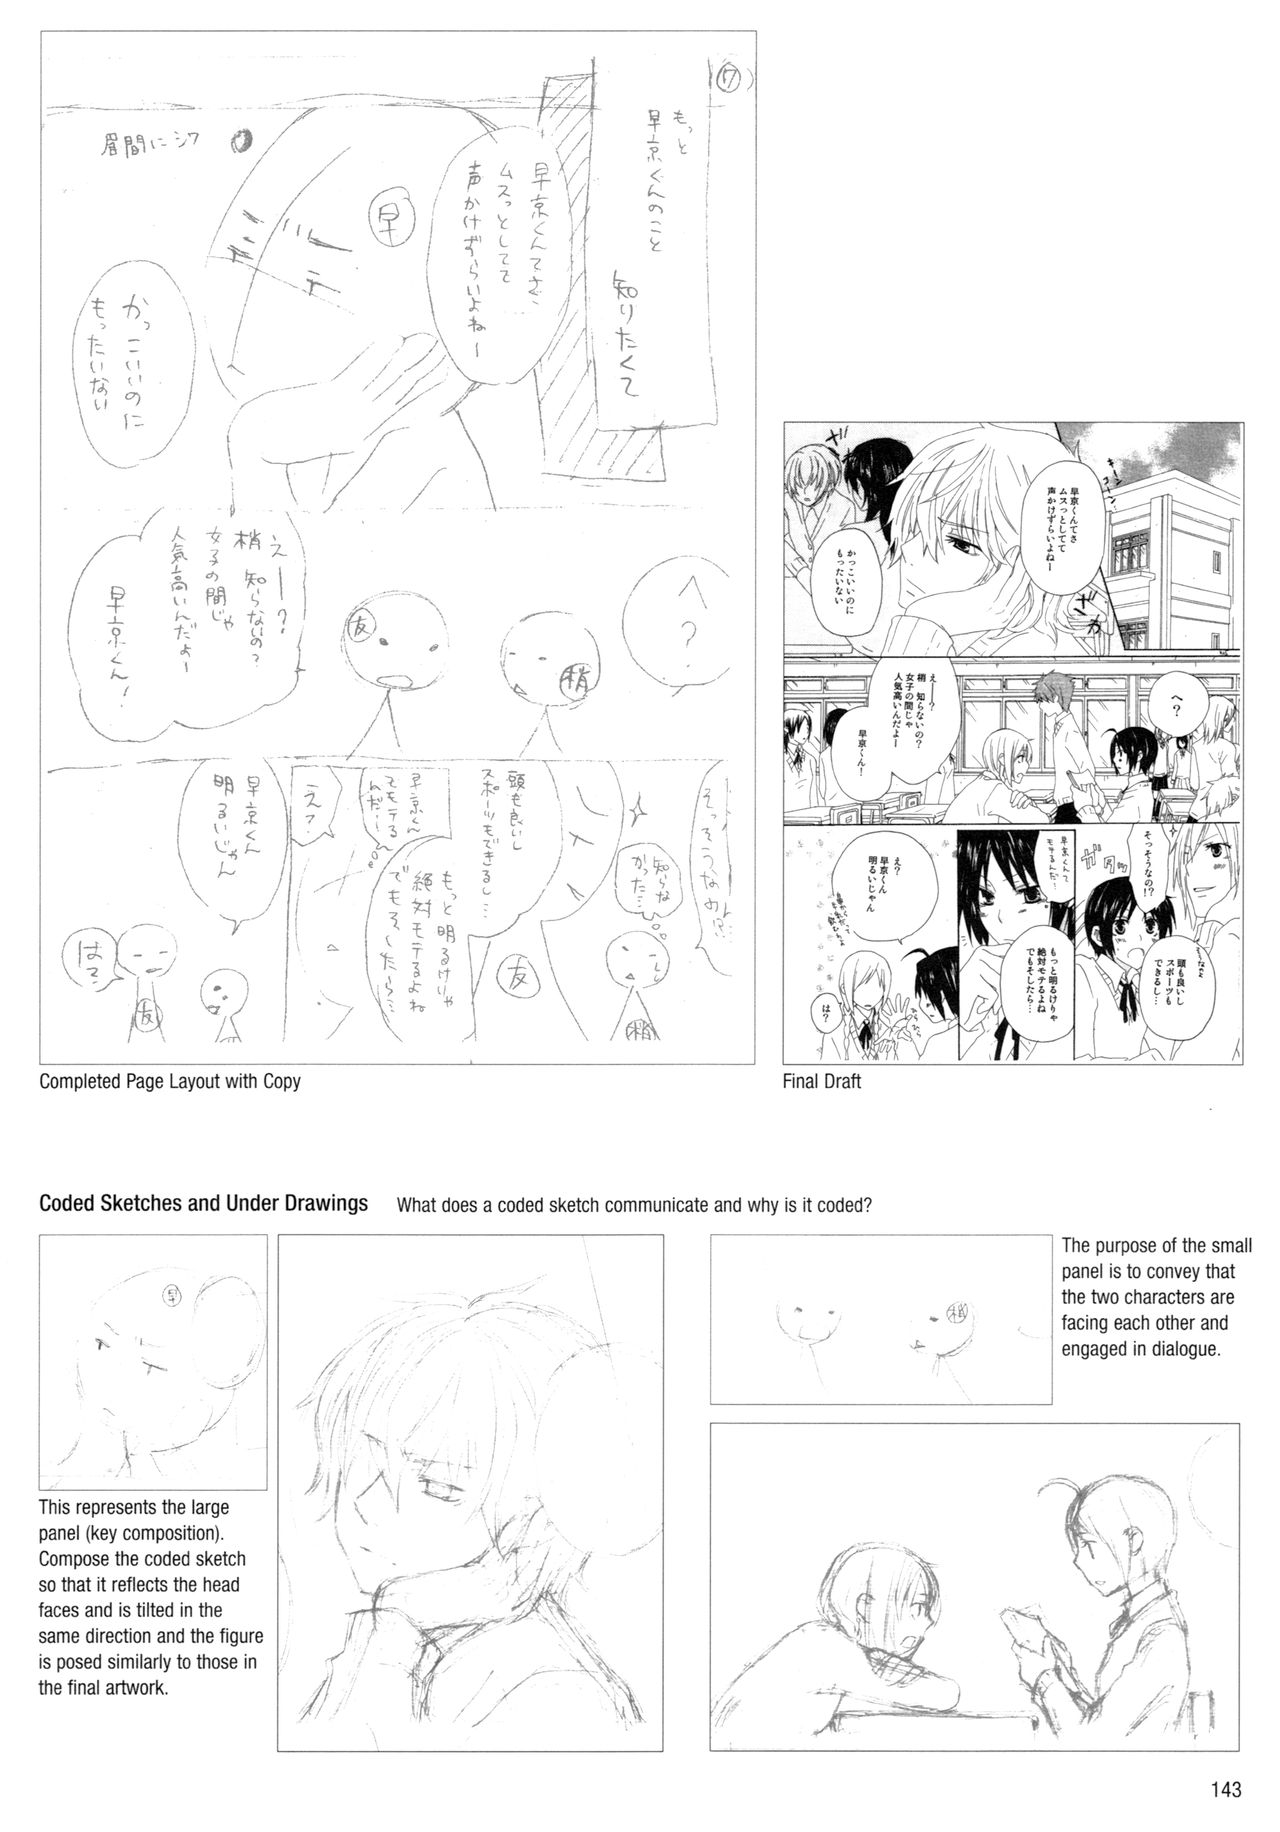 Sketching Manga-Style Vol. 3 - Unforgettable Characters 142